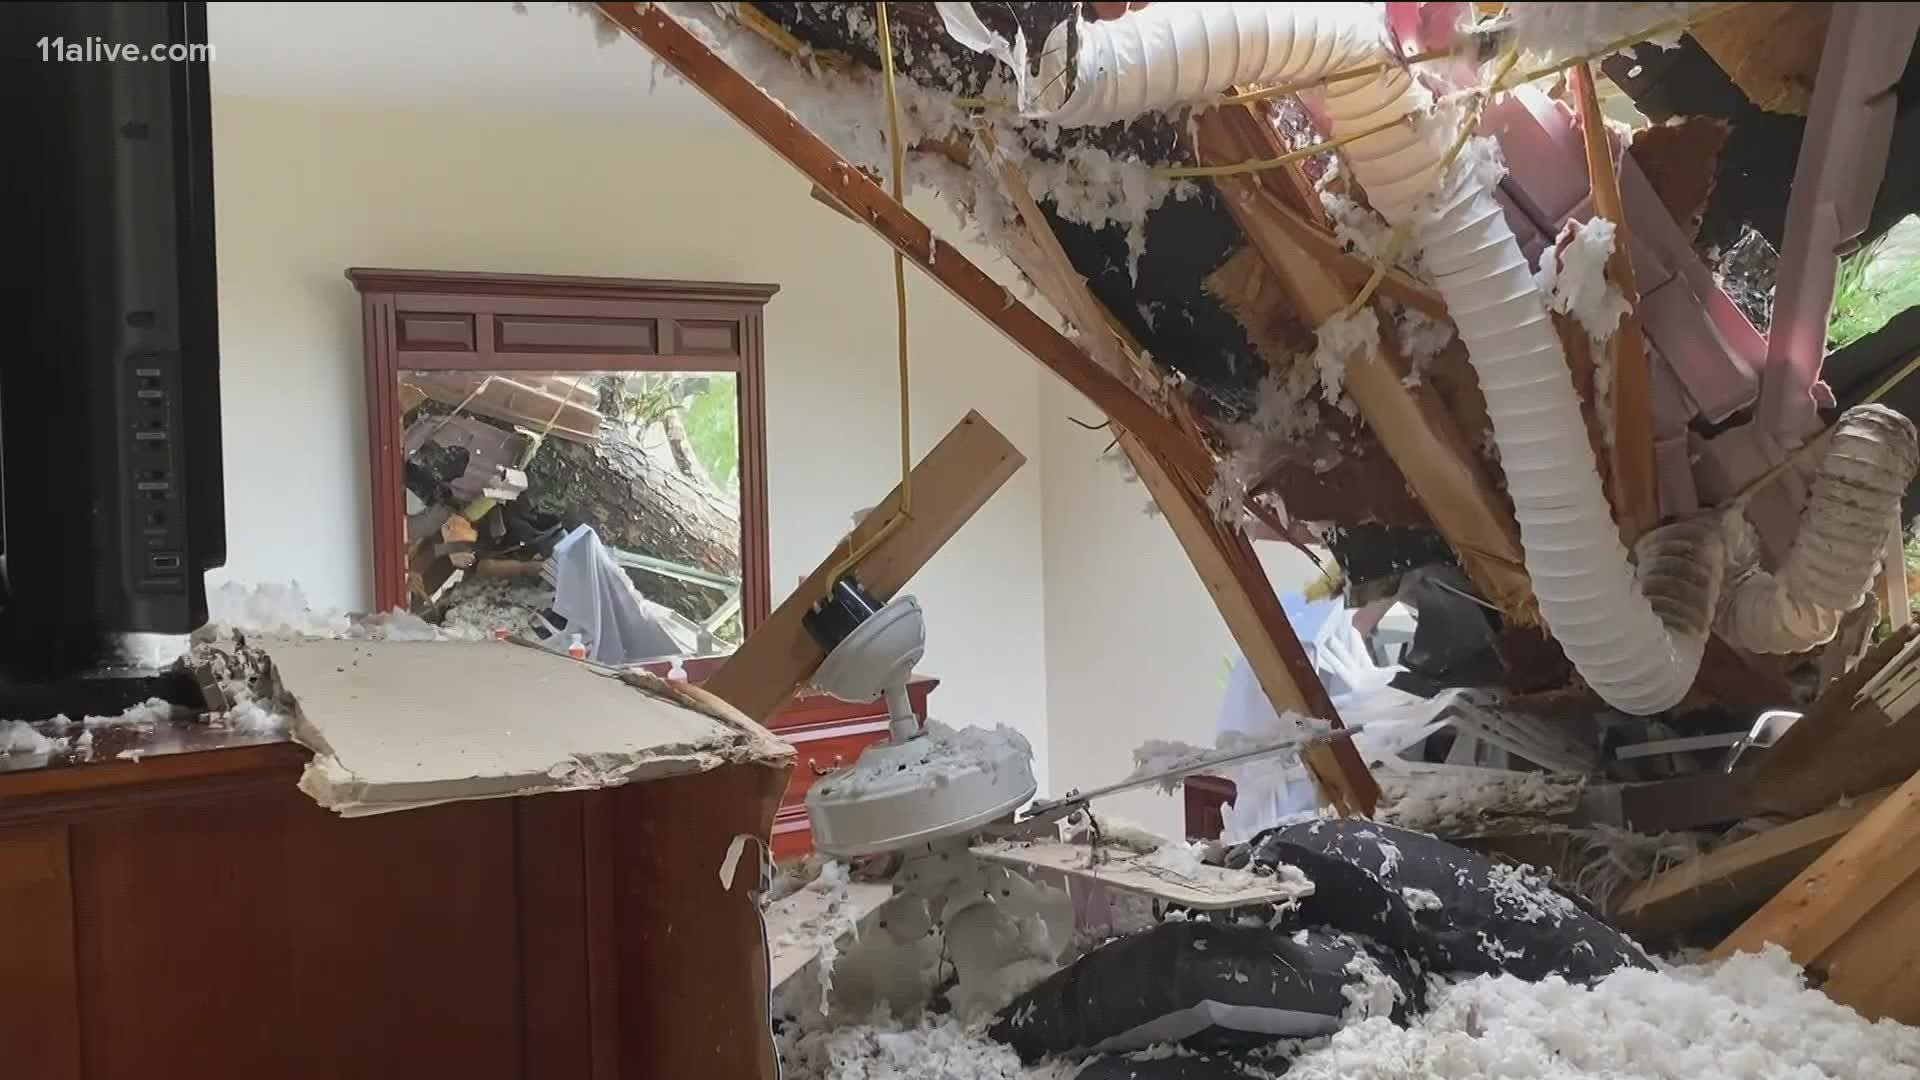 One apartment complex had a tree fall completely through the roof.